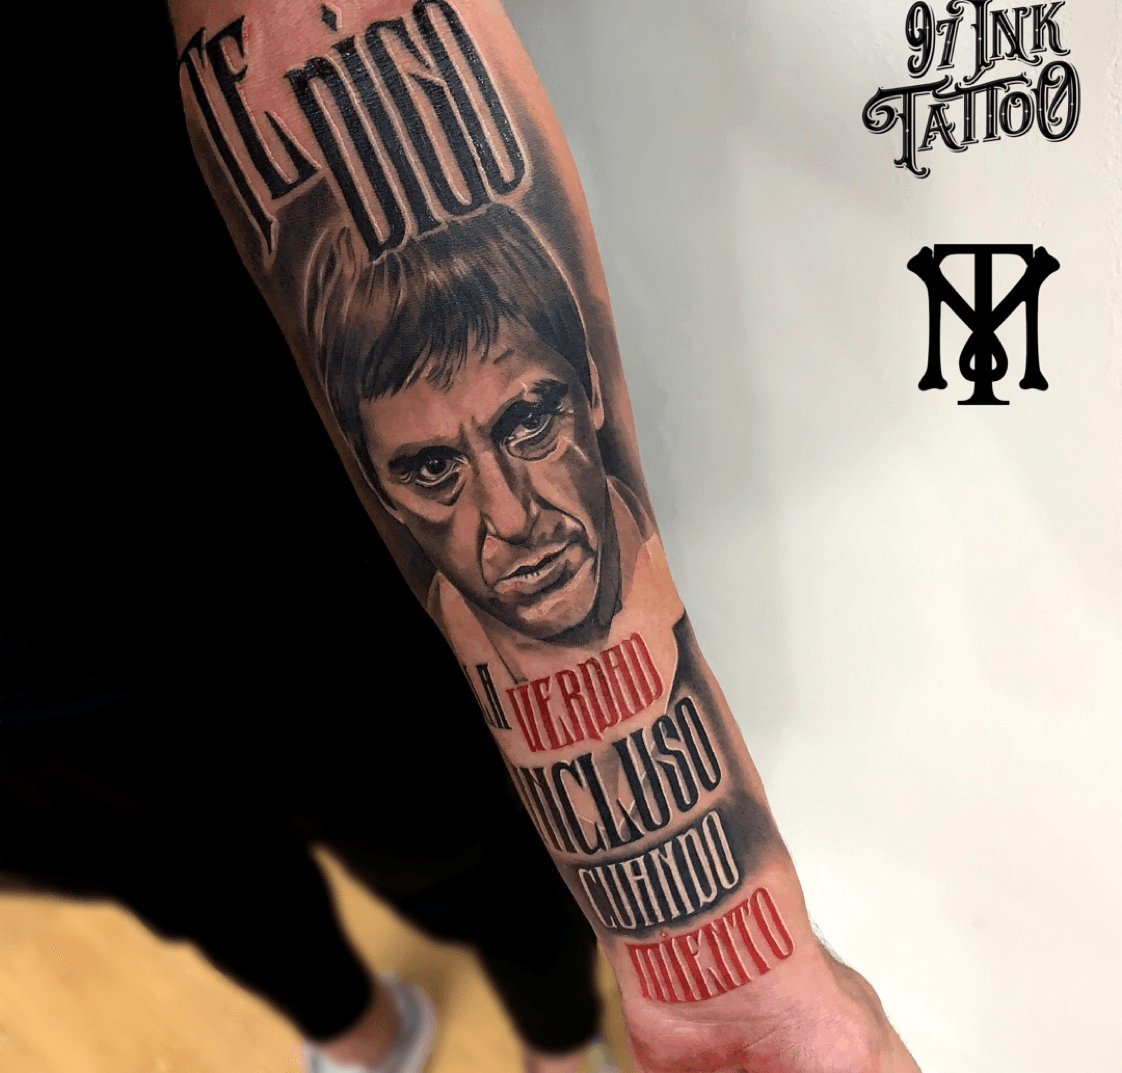 40 Scarface Tattoo Design Ideas For Men  Al Pacino Ink  Gangster tattoos  Best sleeve tattoos Forearm band tattoos